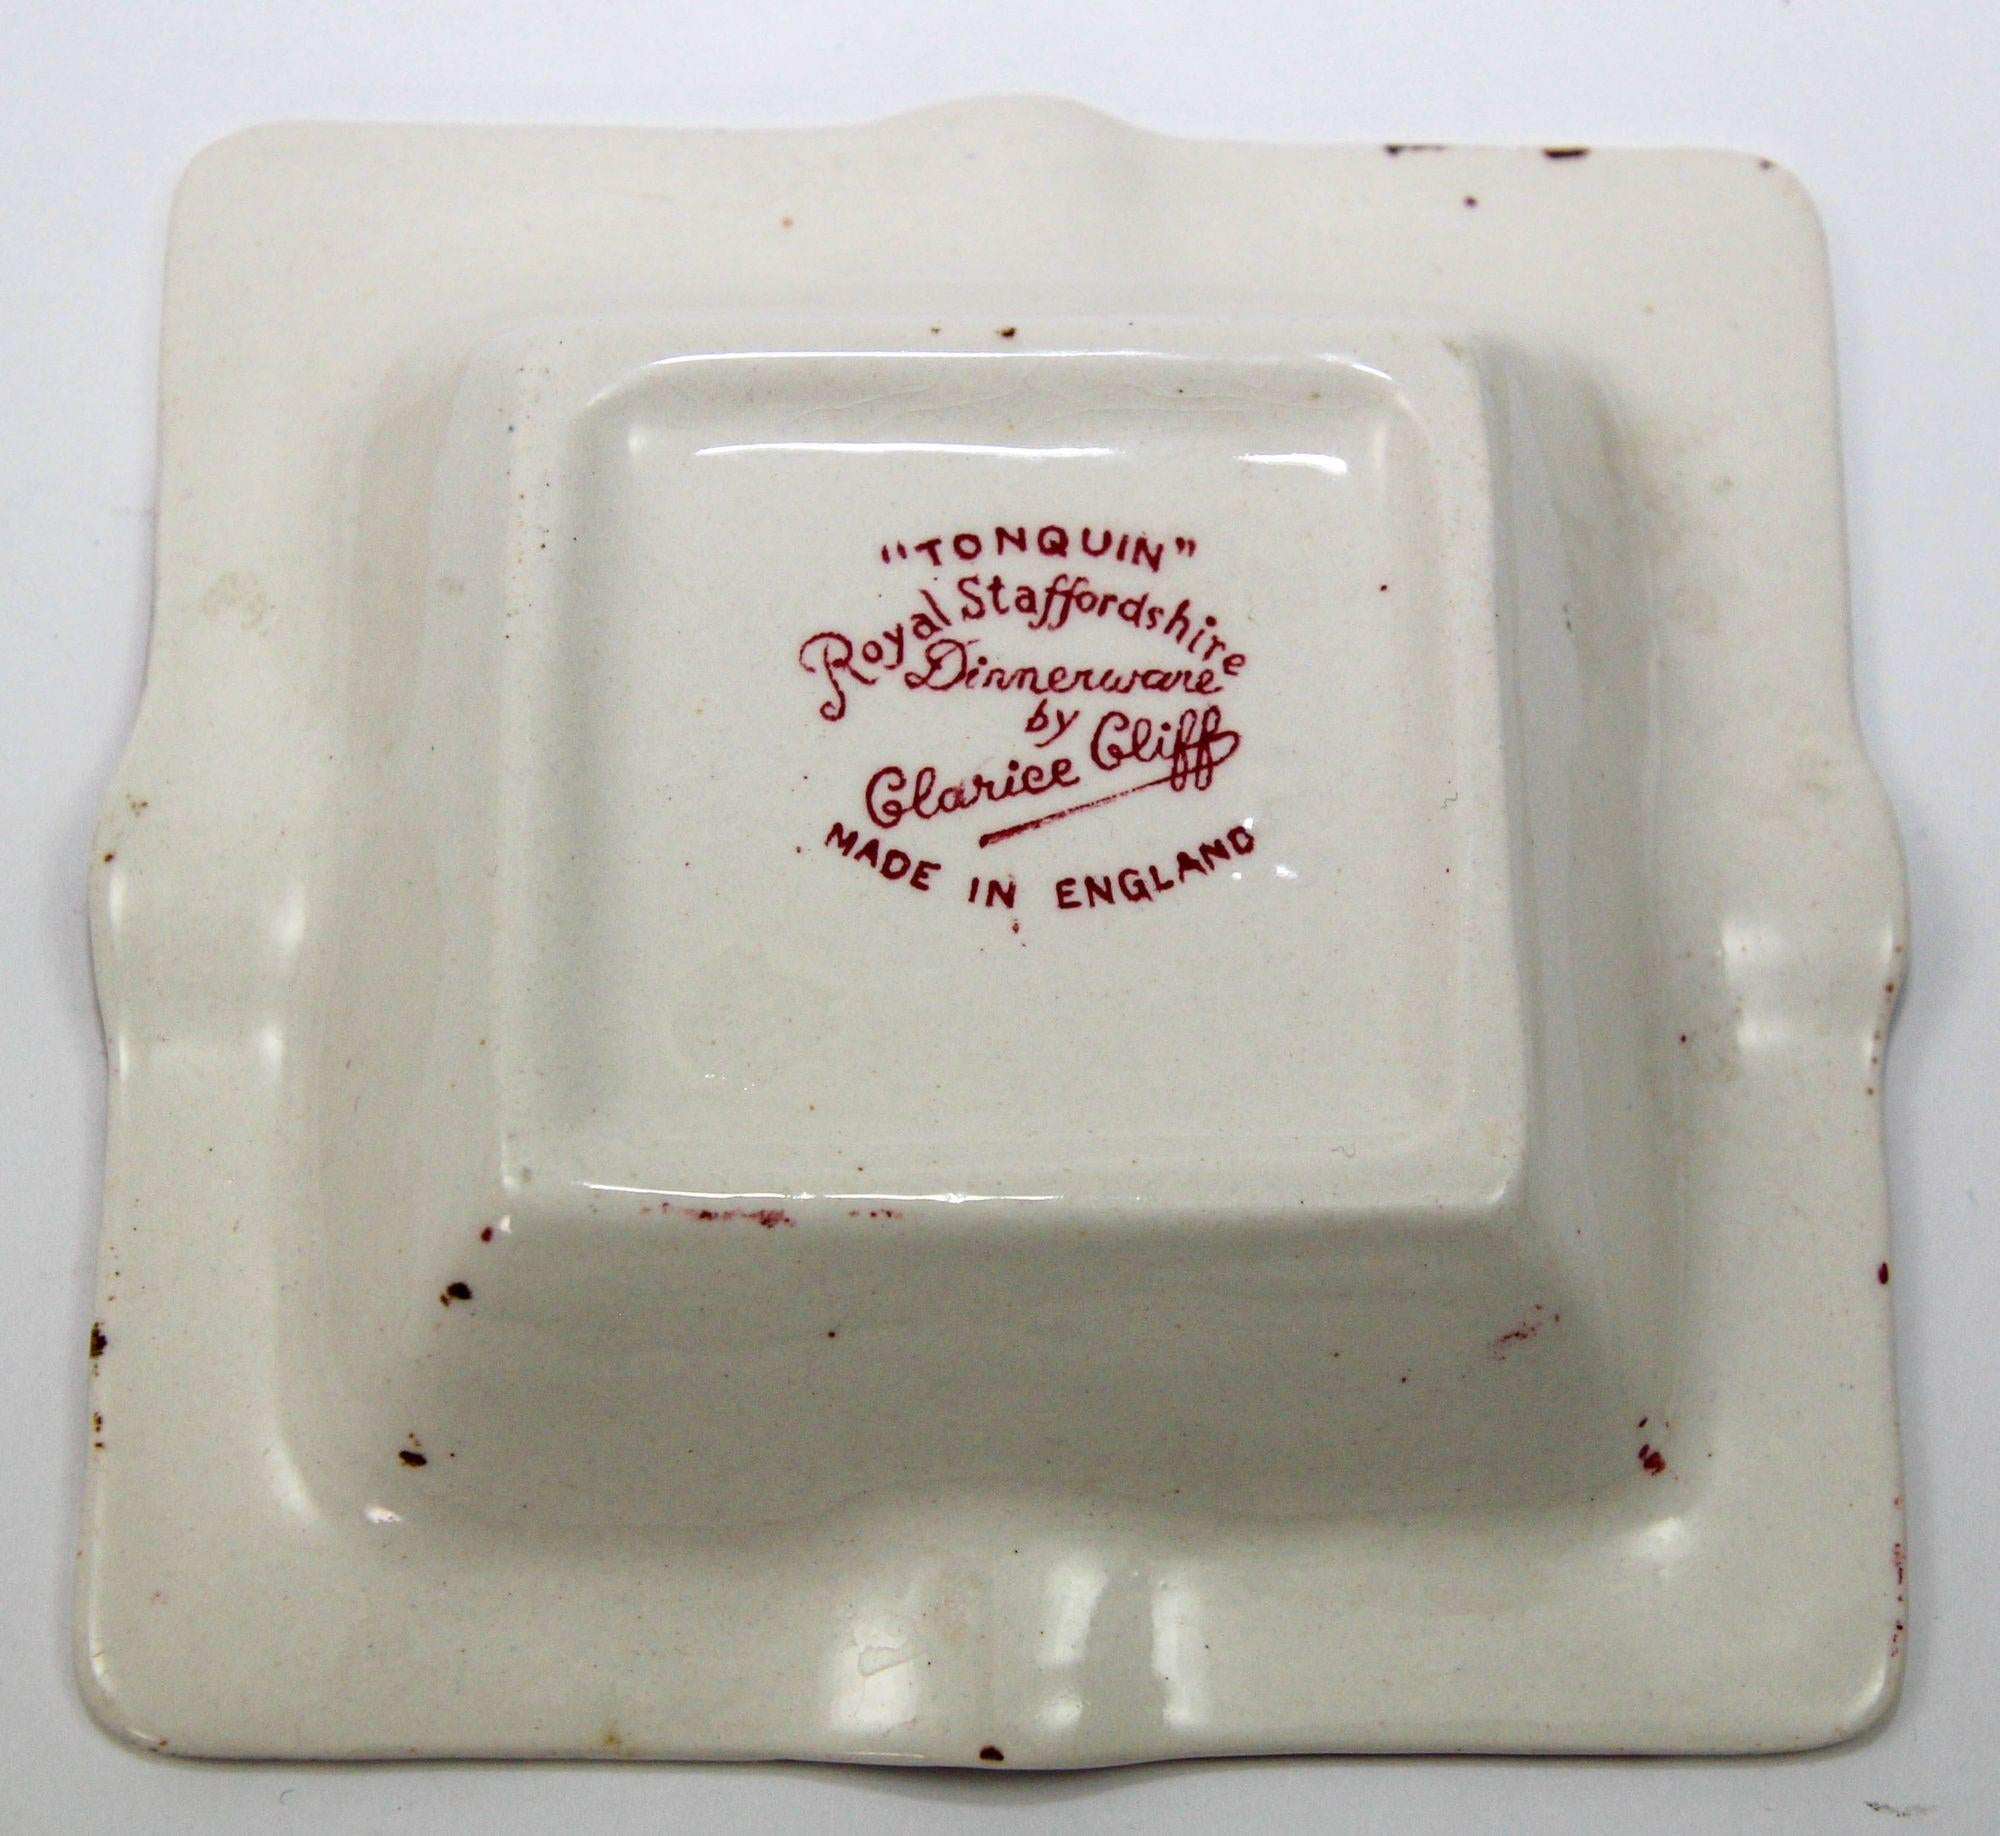 Tonquin Red Pink by ROYAL STAFFORDSHIRE by Clarice Cliff made in England Ashtray For Sale 1